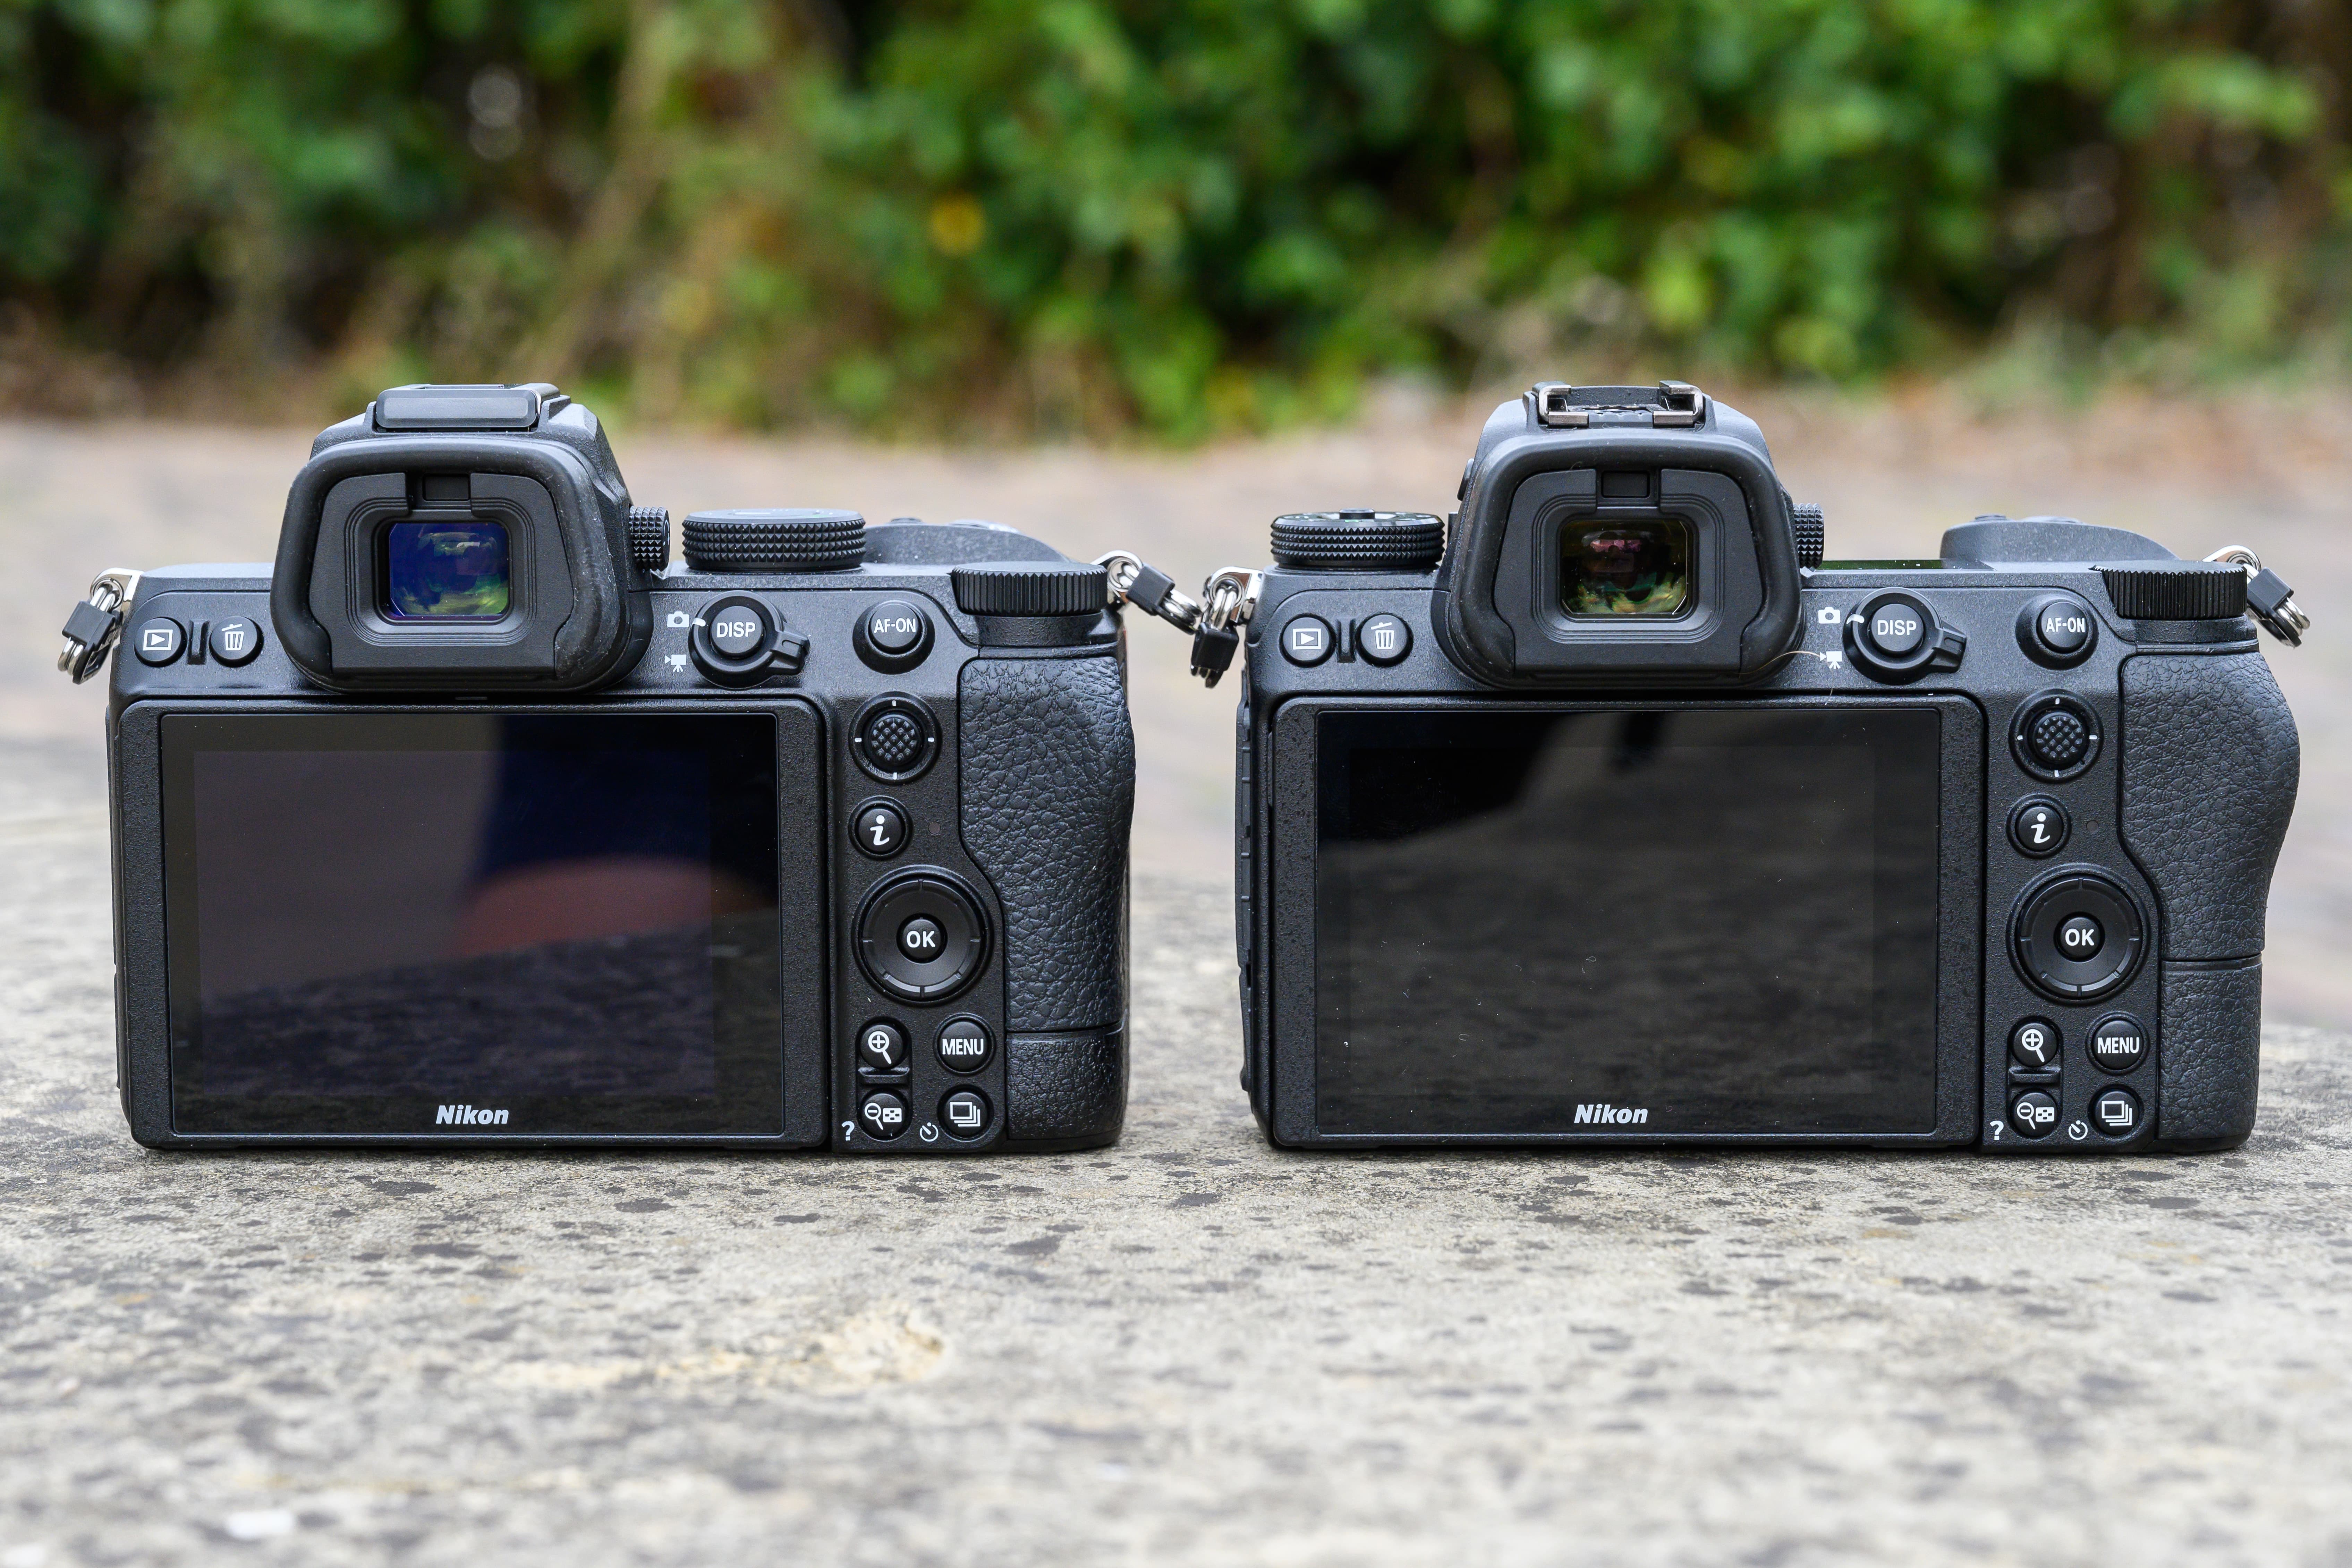 The Nikon Z5 (left) and Nikon Z6 (right). The general feel of the Nikon Z5 in the hand is very similar to that of the Nikon Z6, albeit with a different layout and no display panel on the top plate